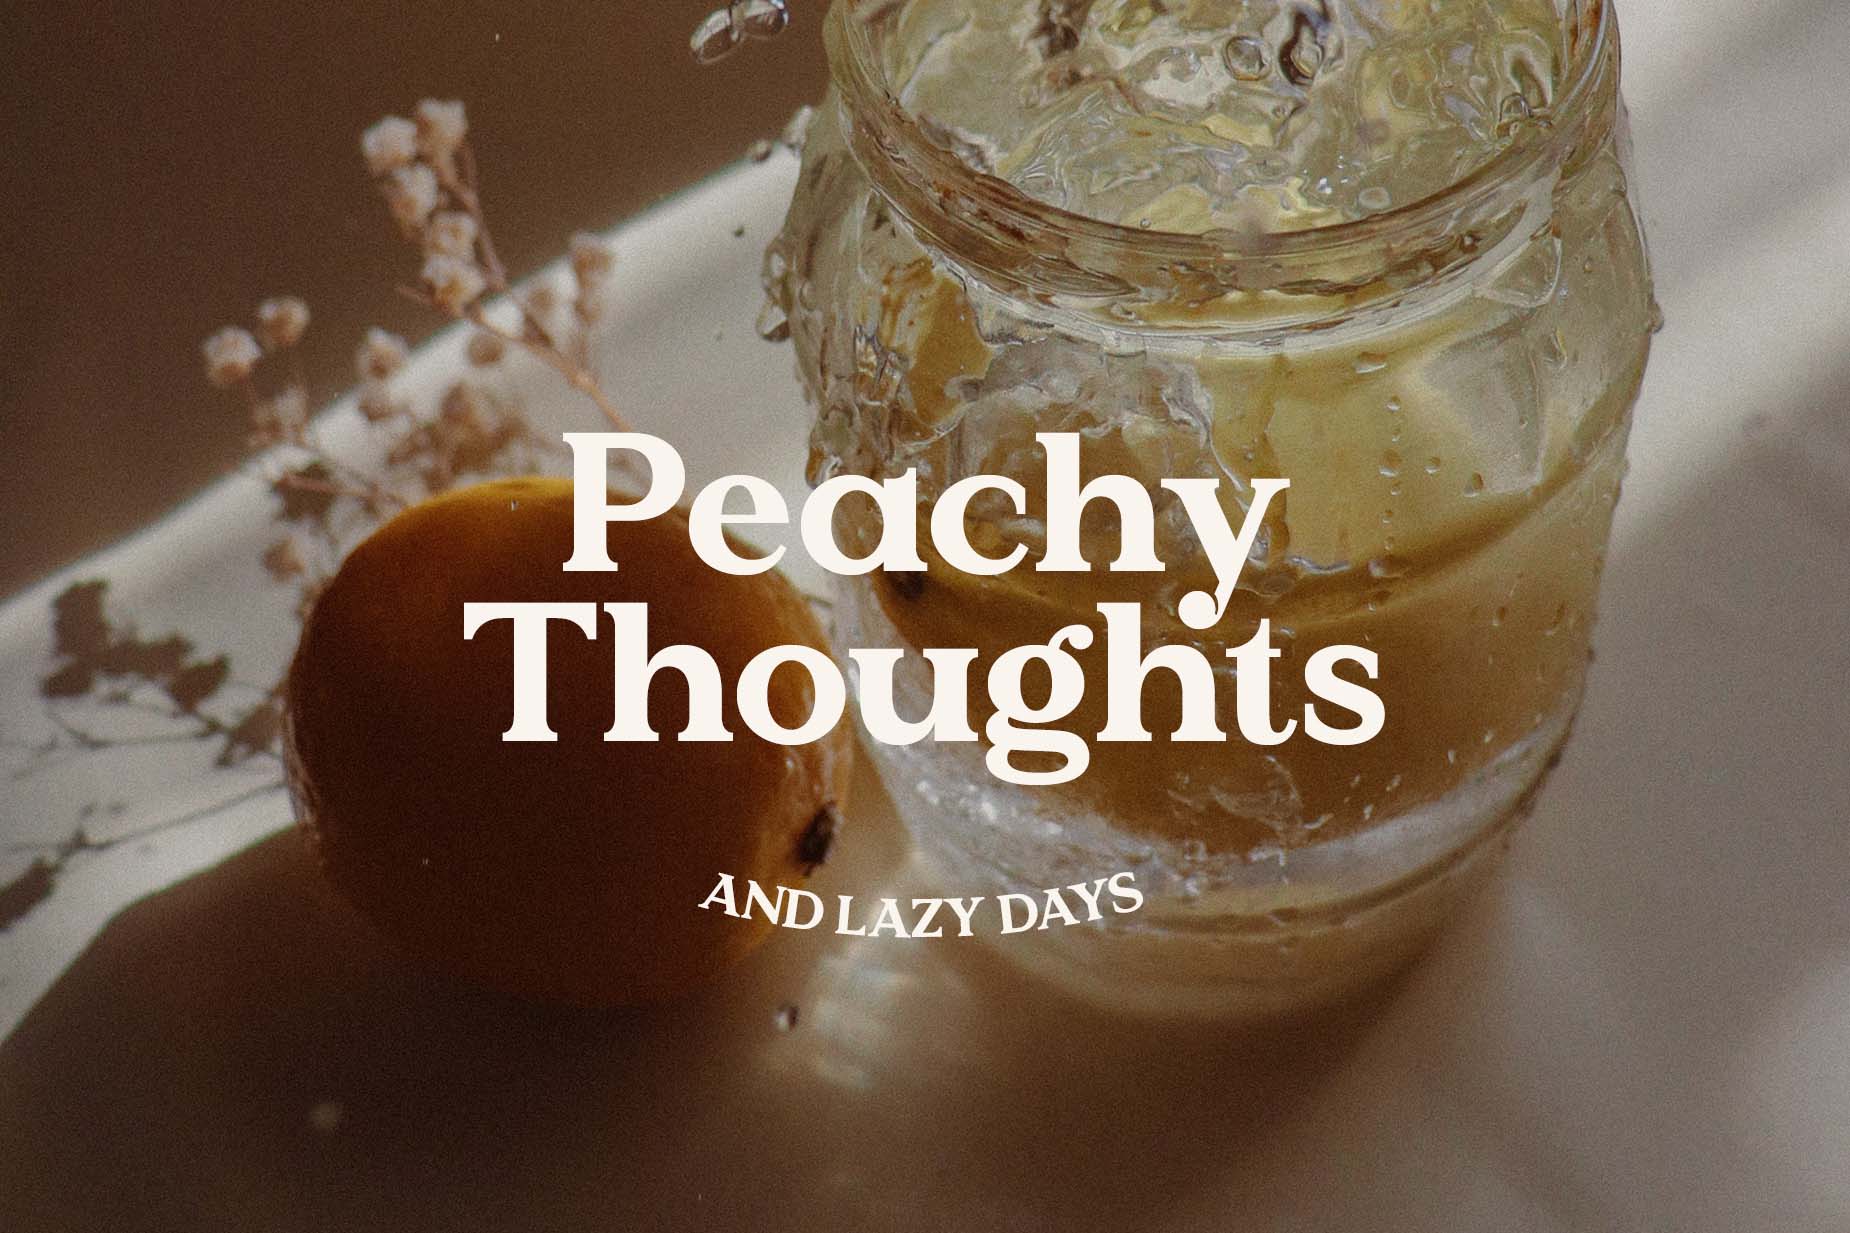 Peachy Thoughts And Lazy Days - Apricosa Vintage Font Bundle